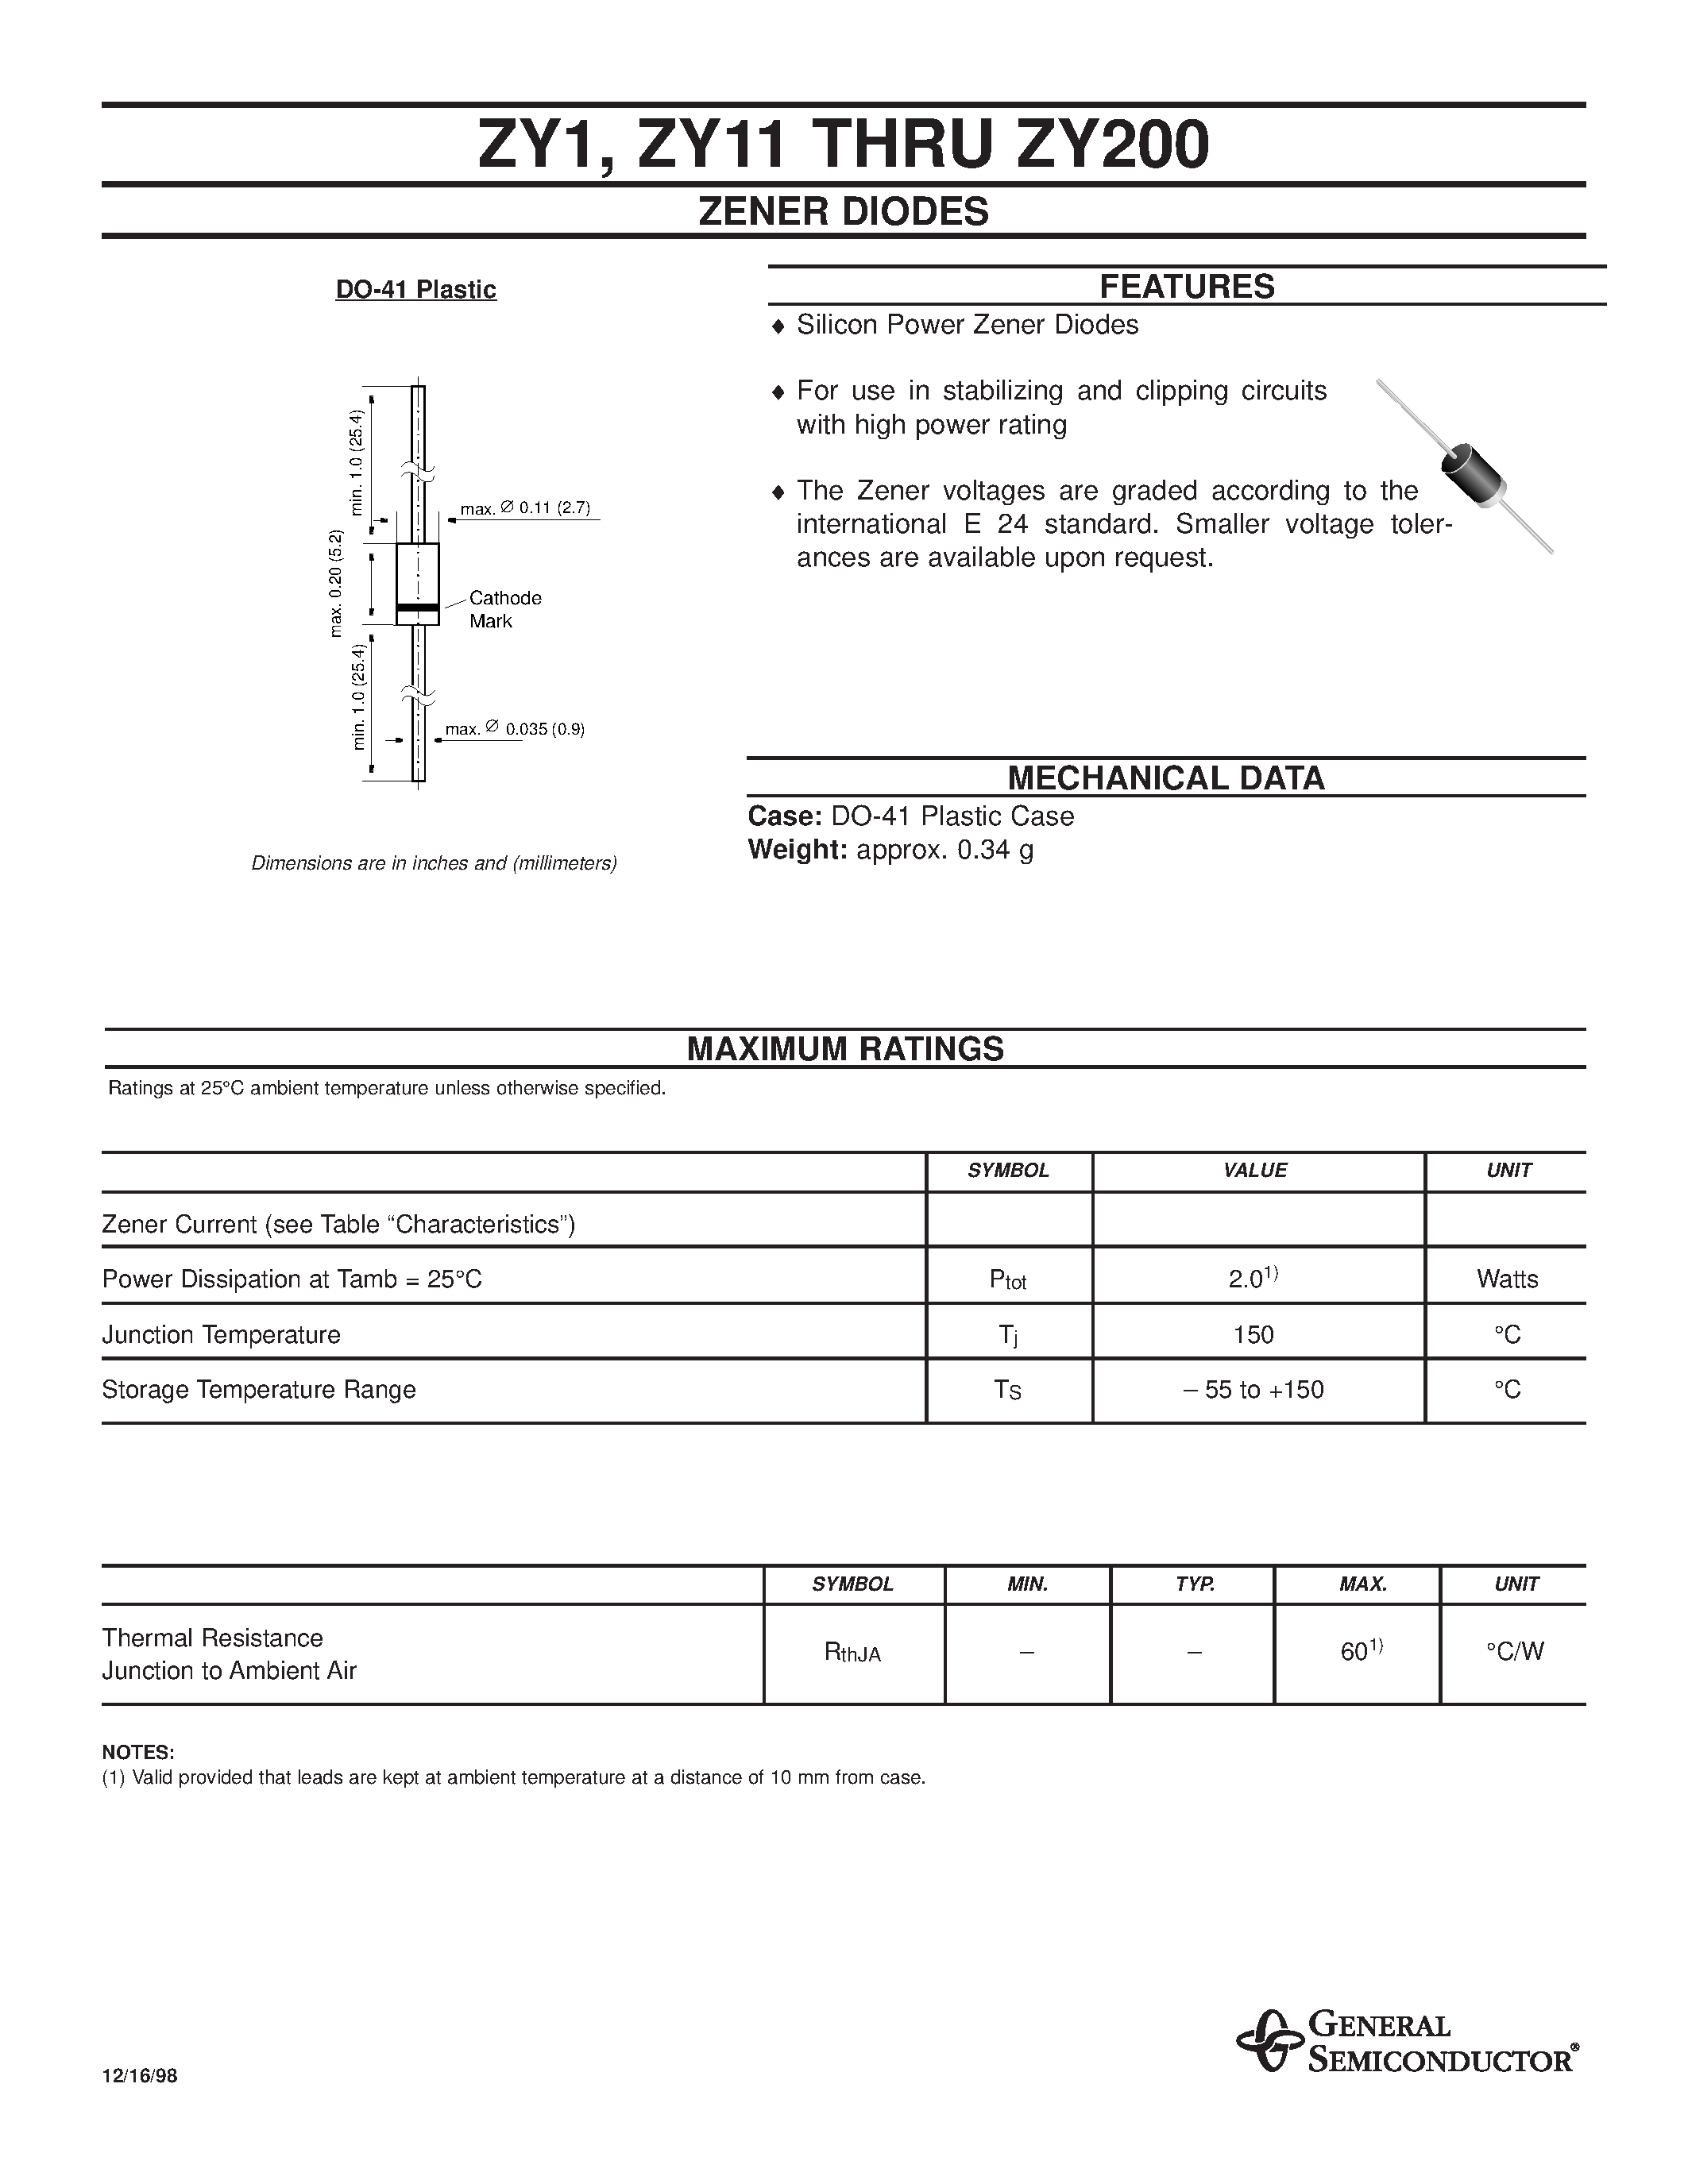 Datasheet ZY39 - ZENER DIODES page 1